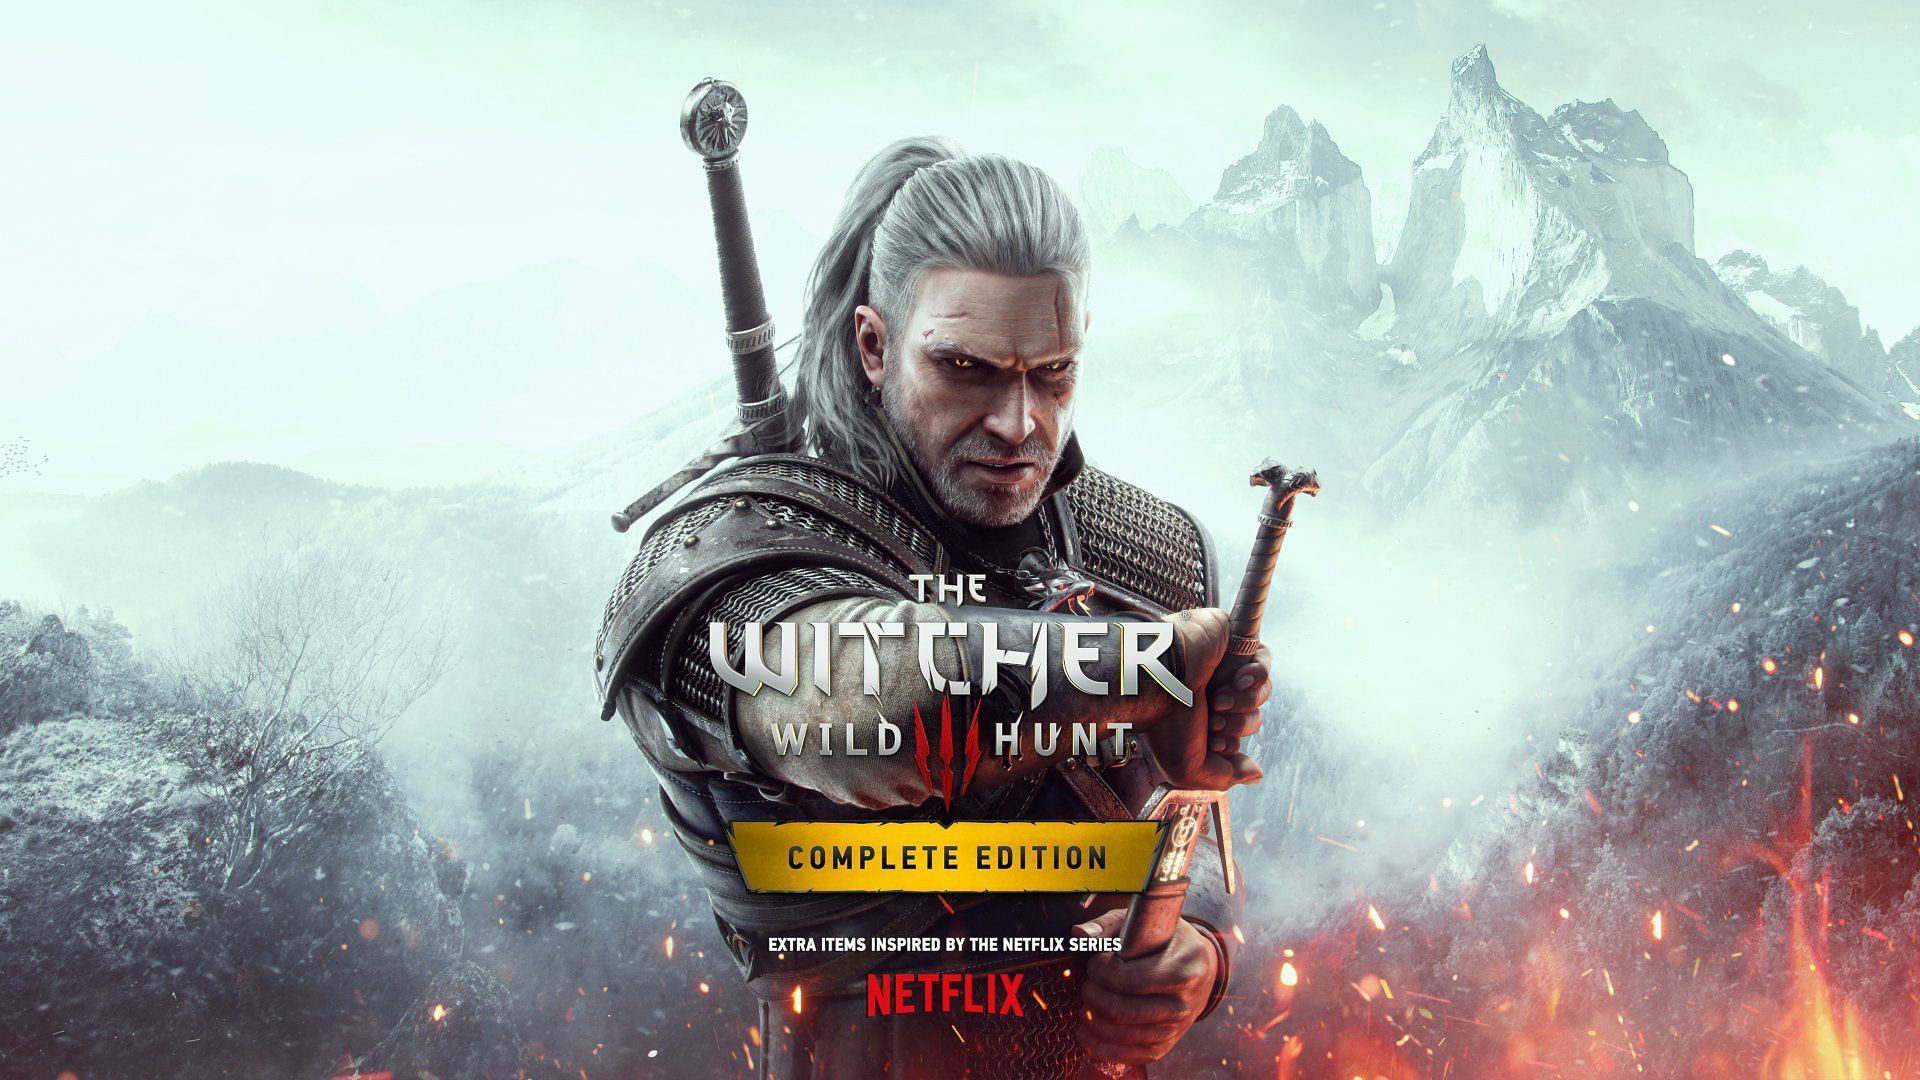 The Witcher 3 Complete Edition (Image via CD Projekt RED)